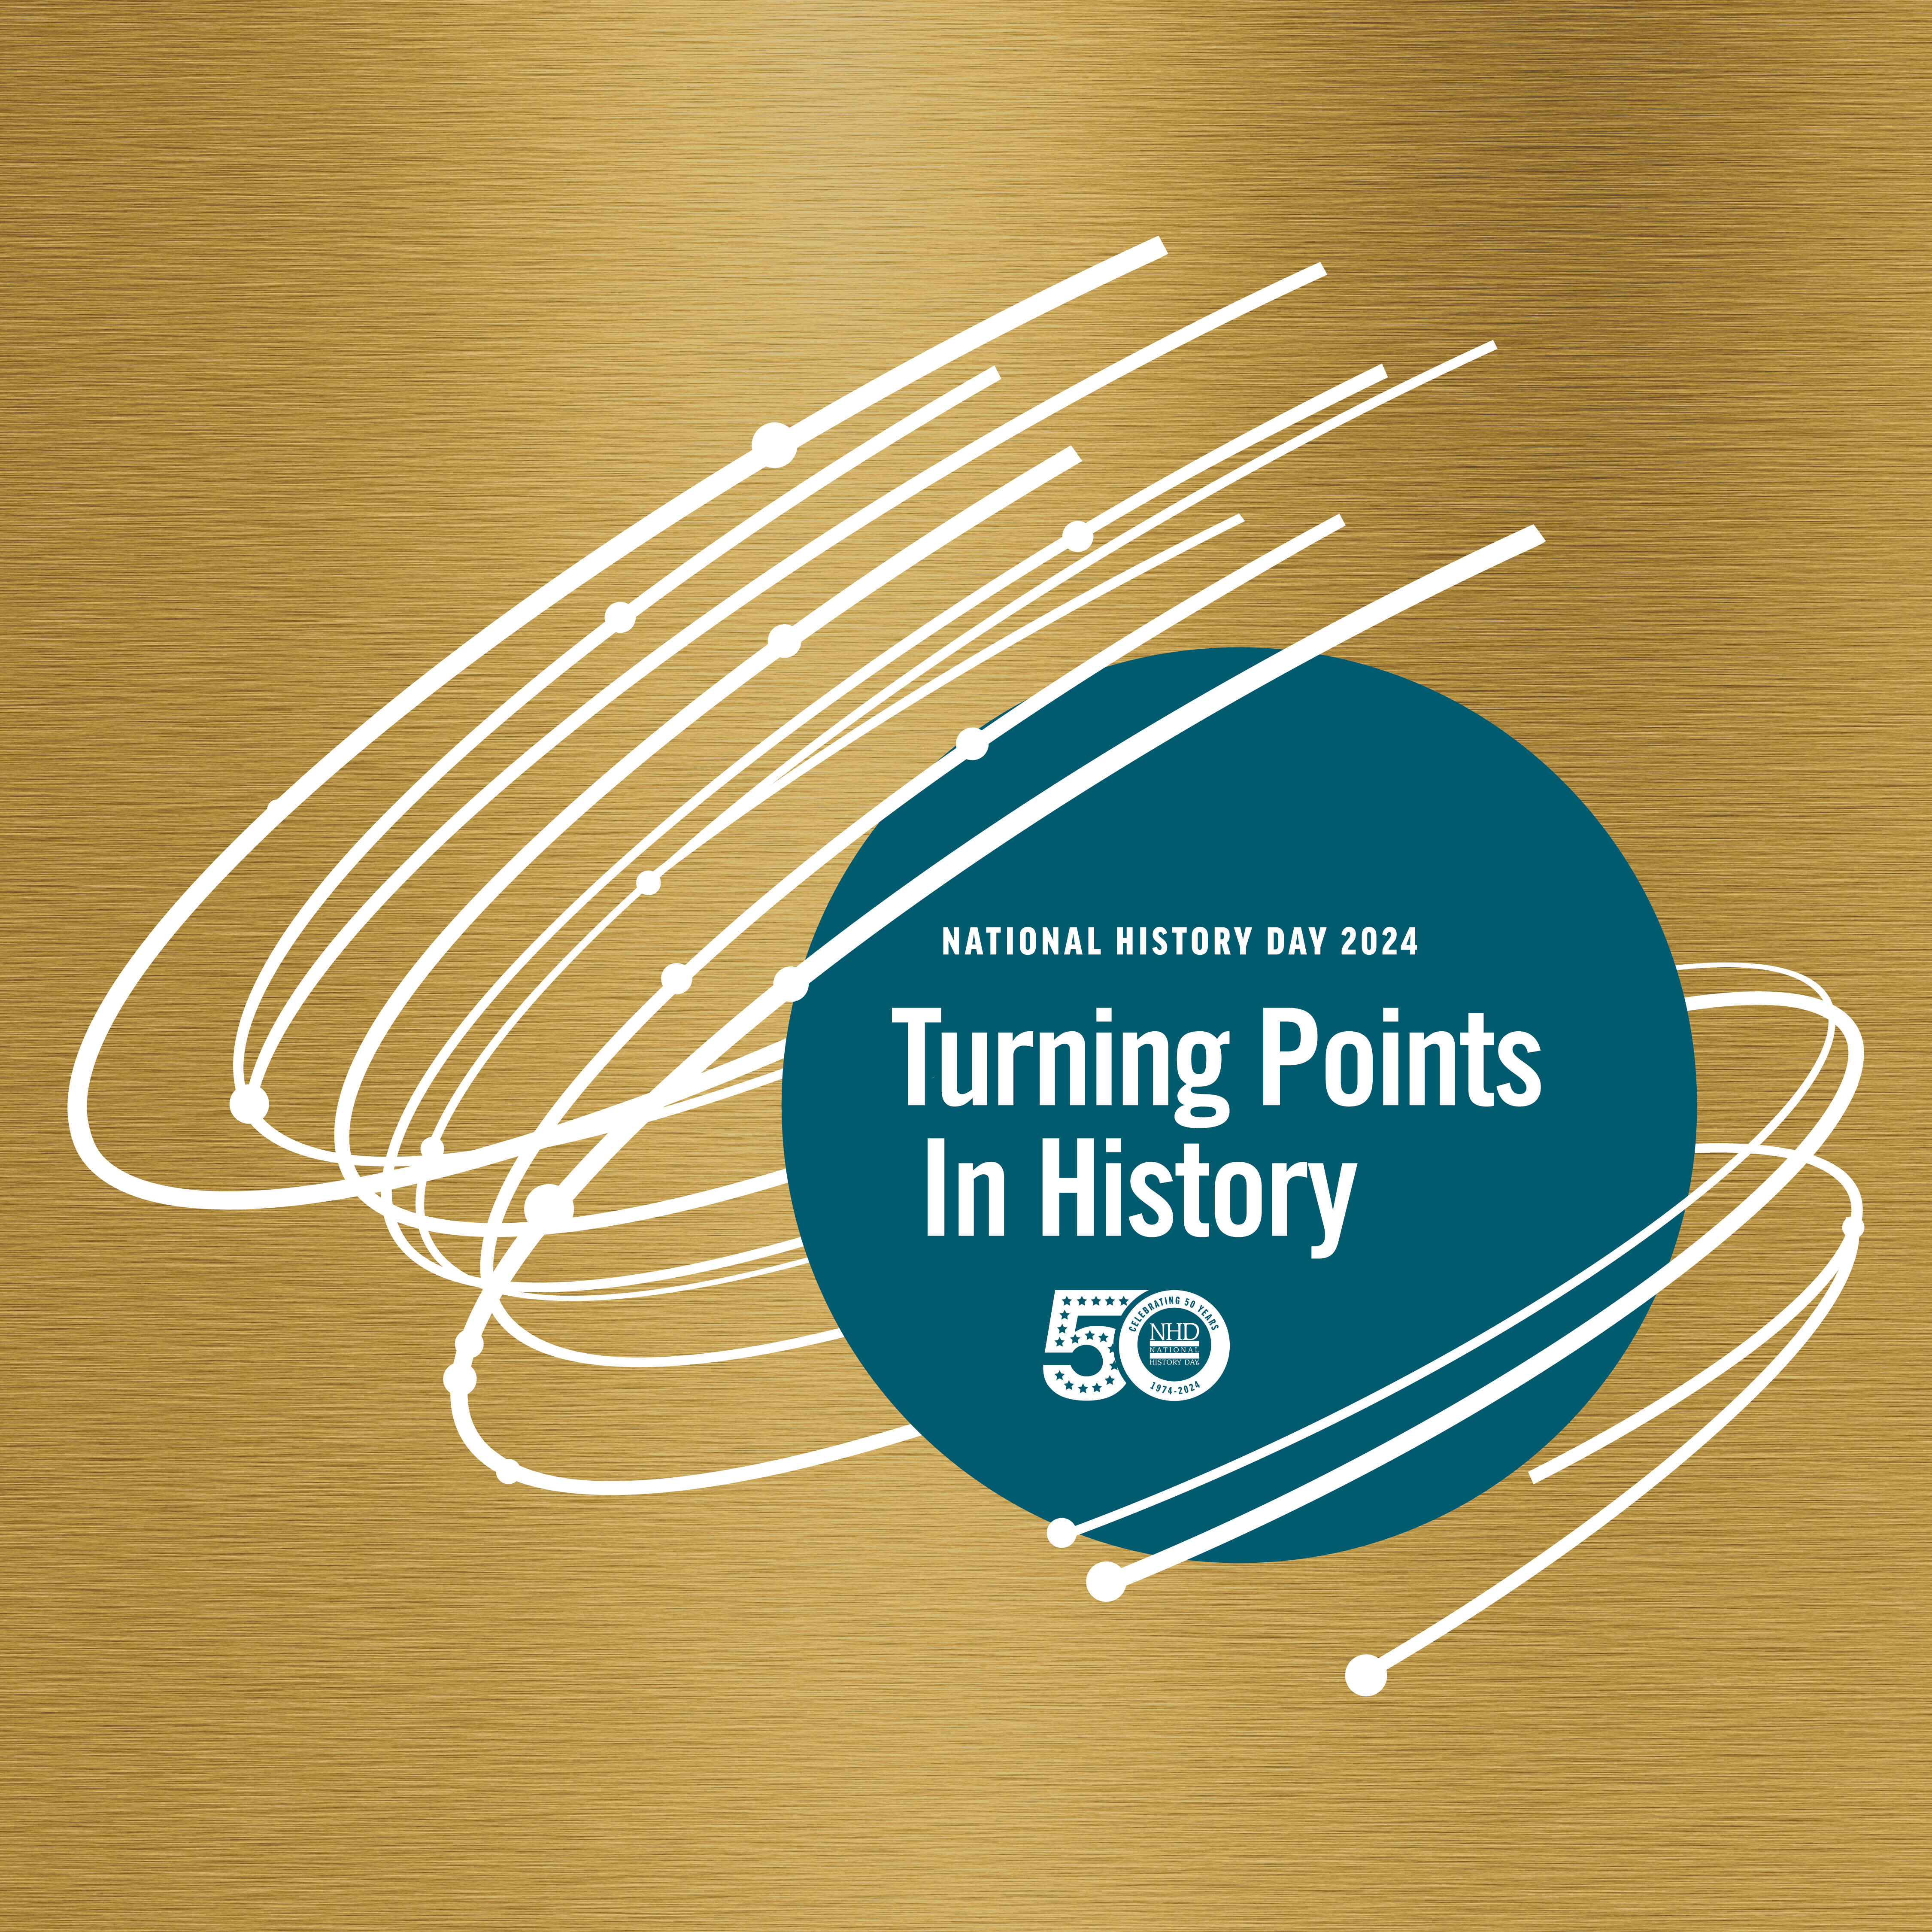 Turning Points in History logo